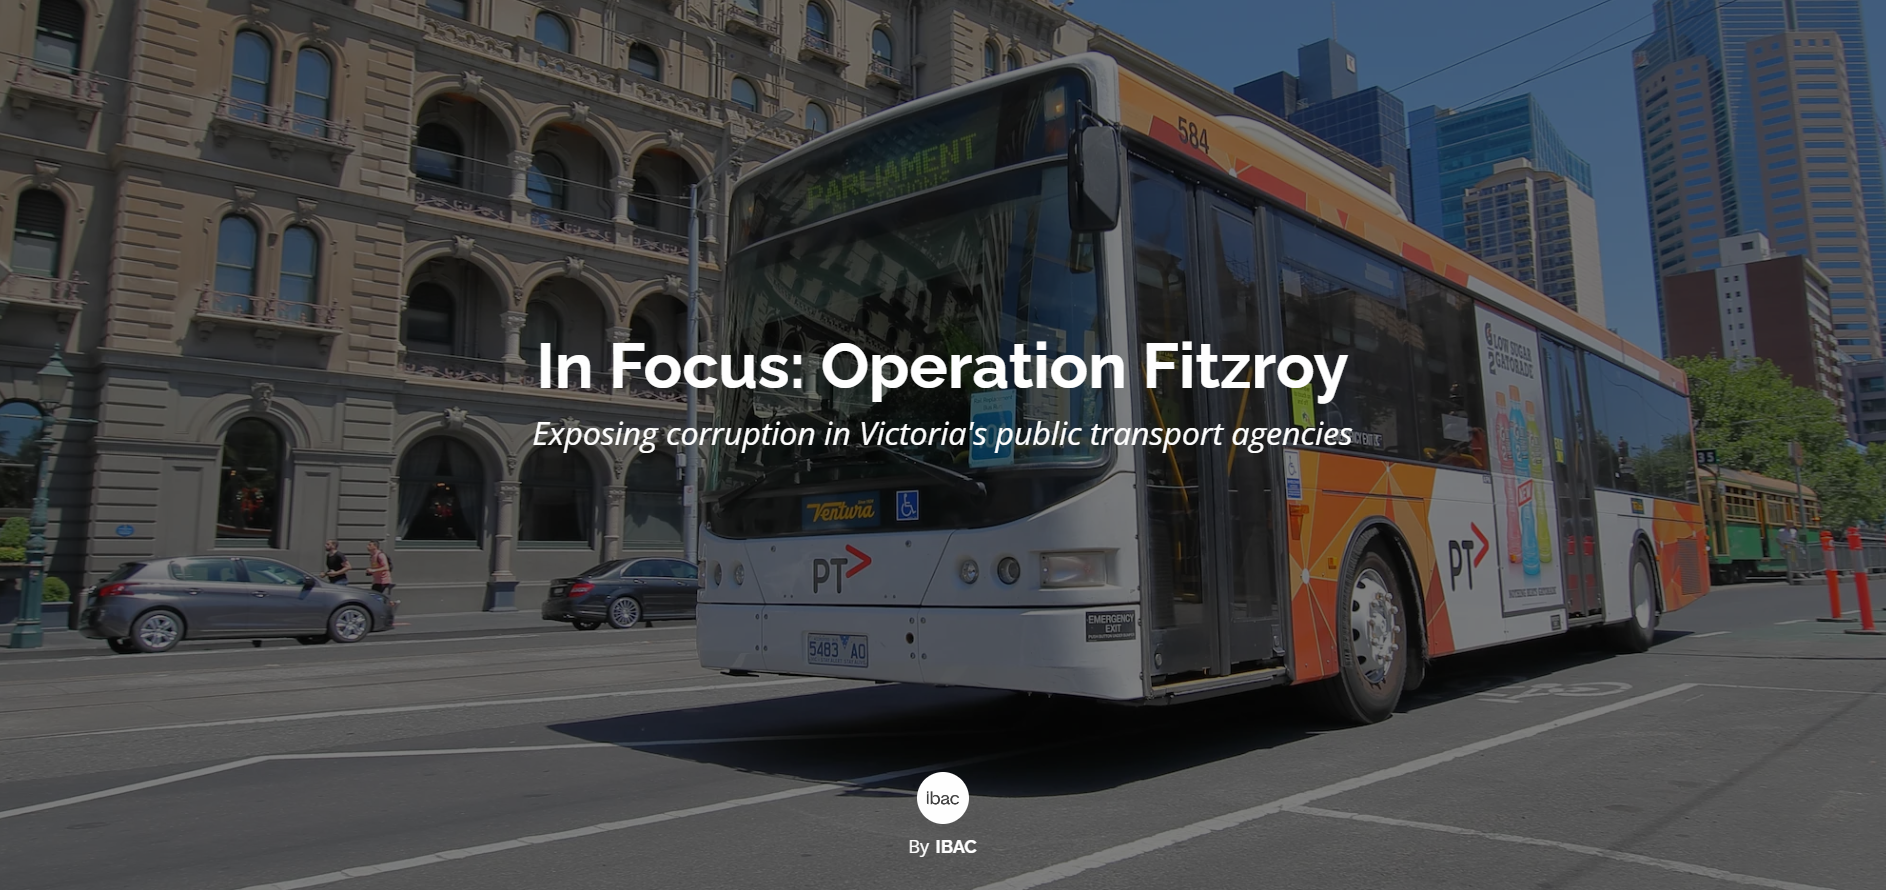 In Focus: Operation Fitzroy